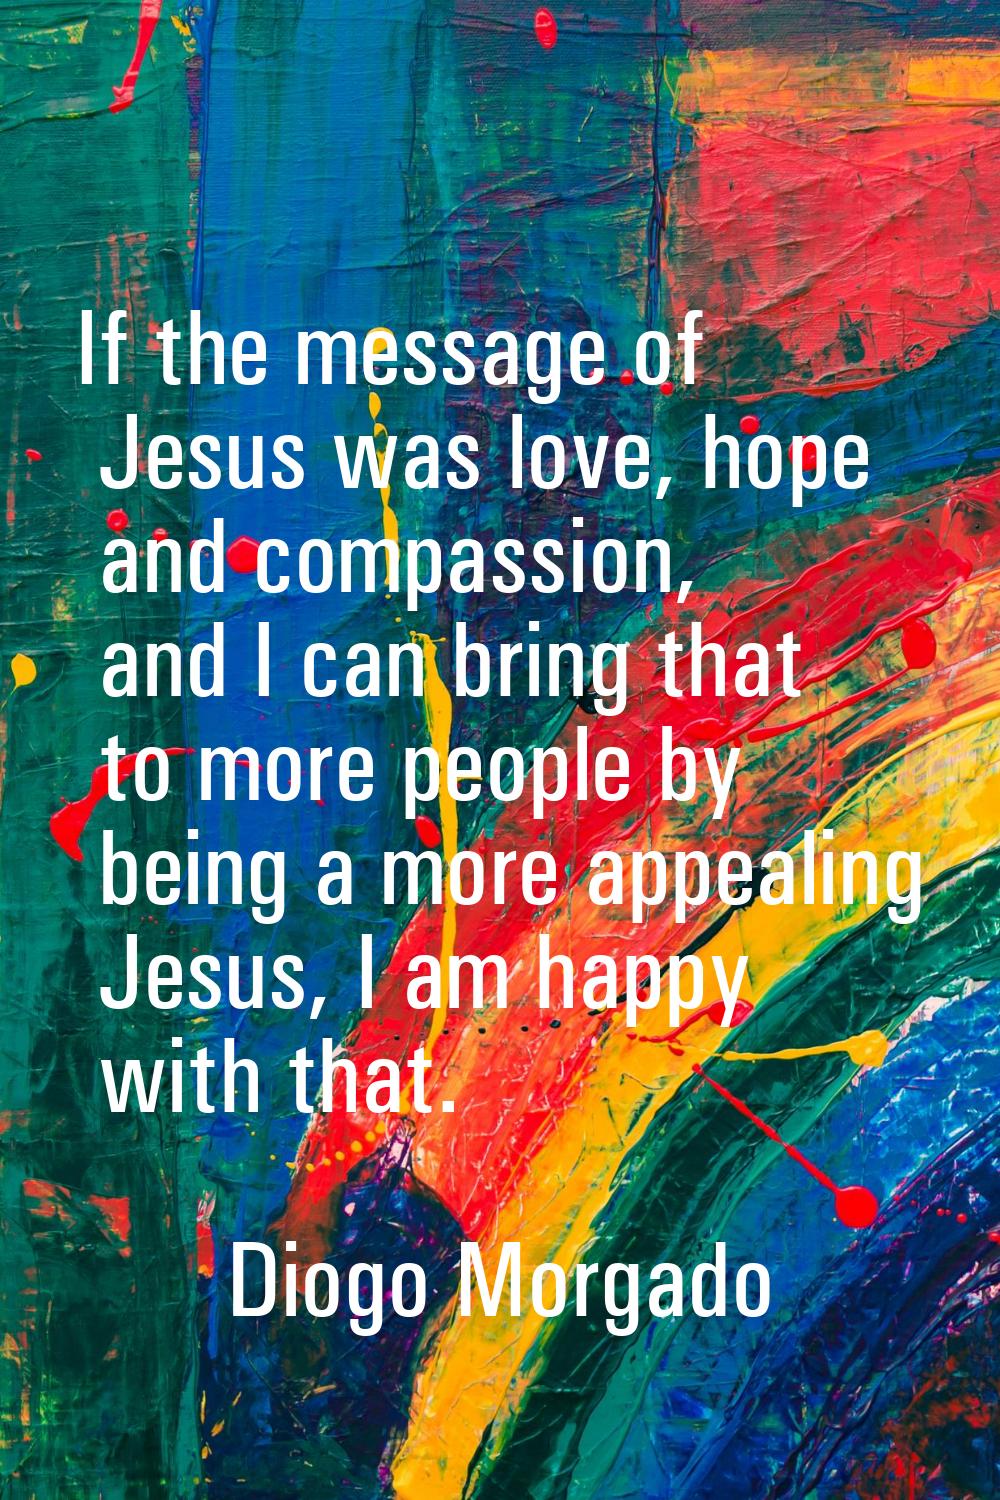 If the message of Jesus was love, hope and compassion, and I can bring that to more people by being